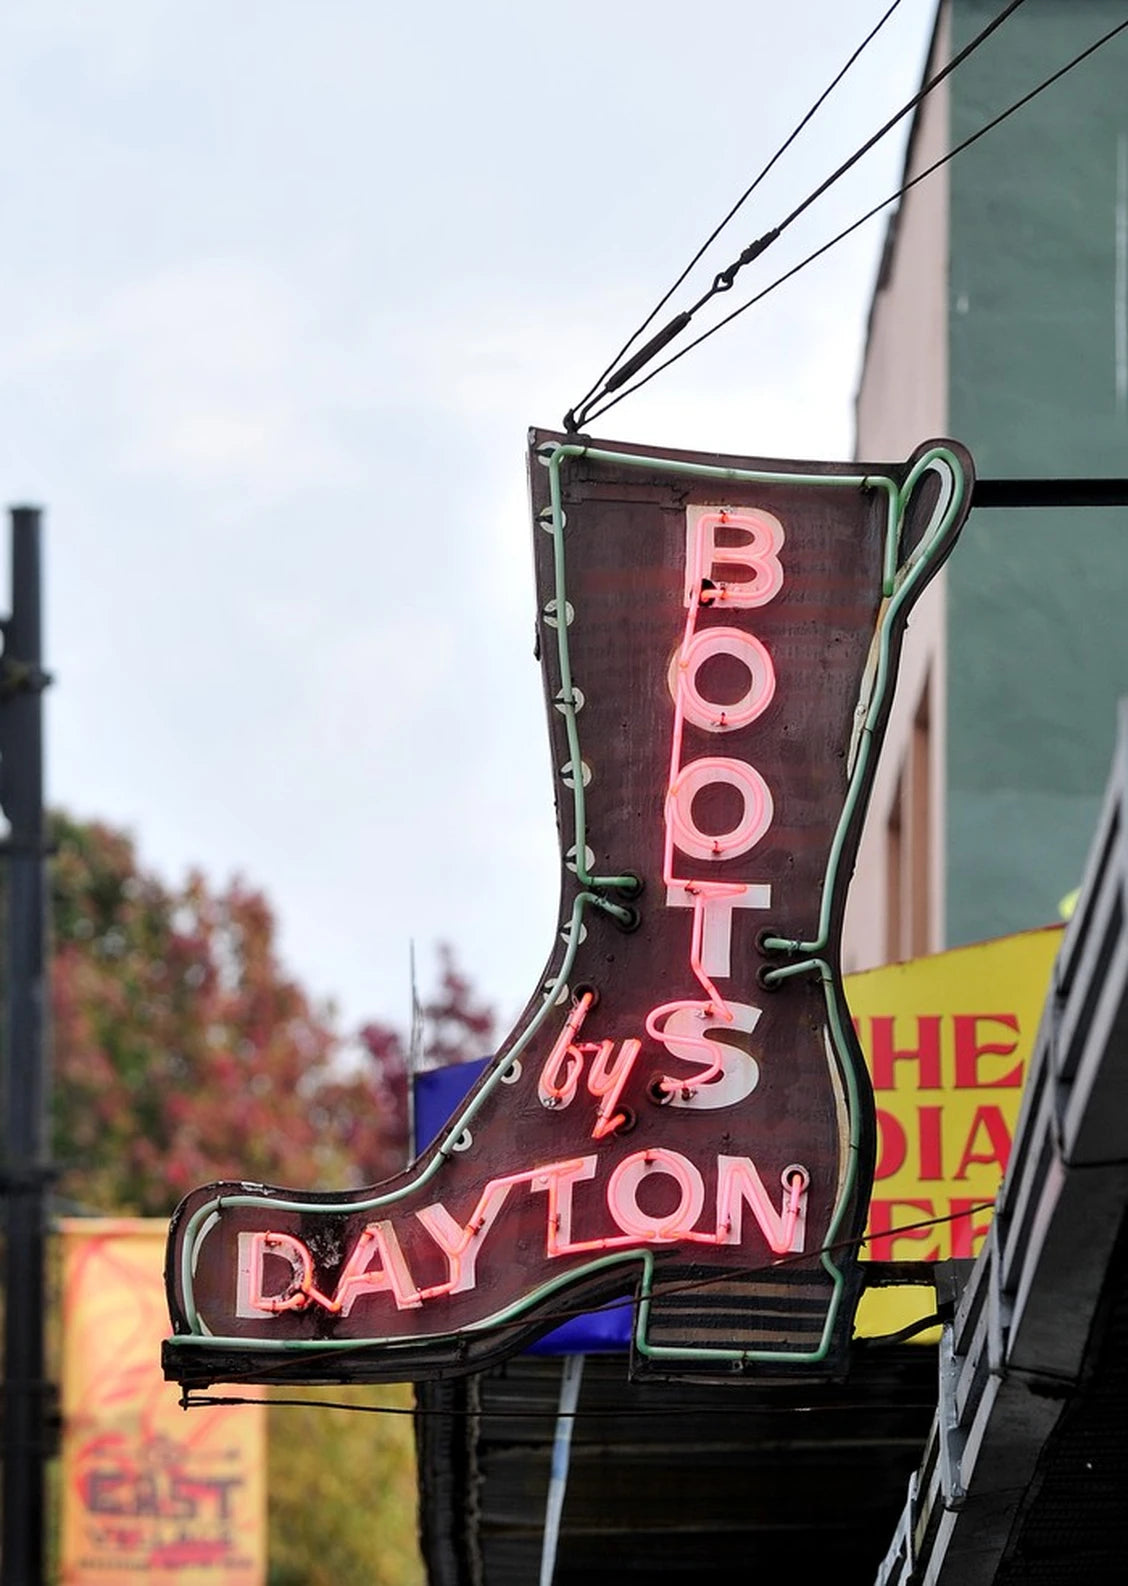 Ex-owner of Dayton Boots sued by Royal Bank for $556,000 in overdue loans